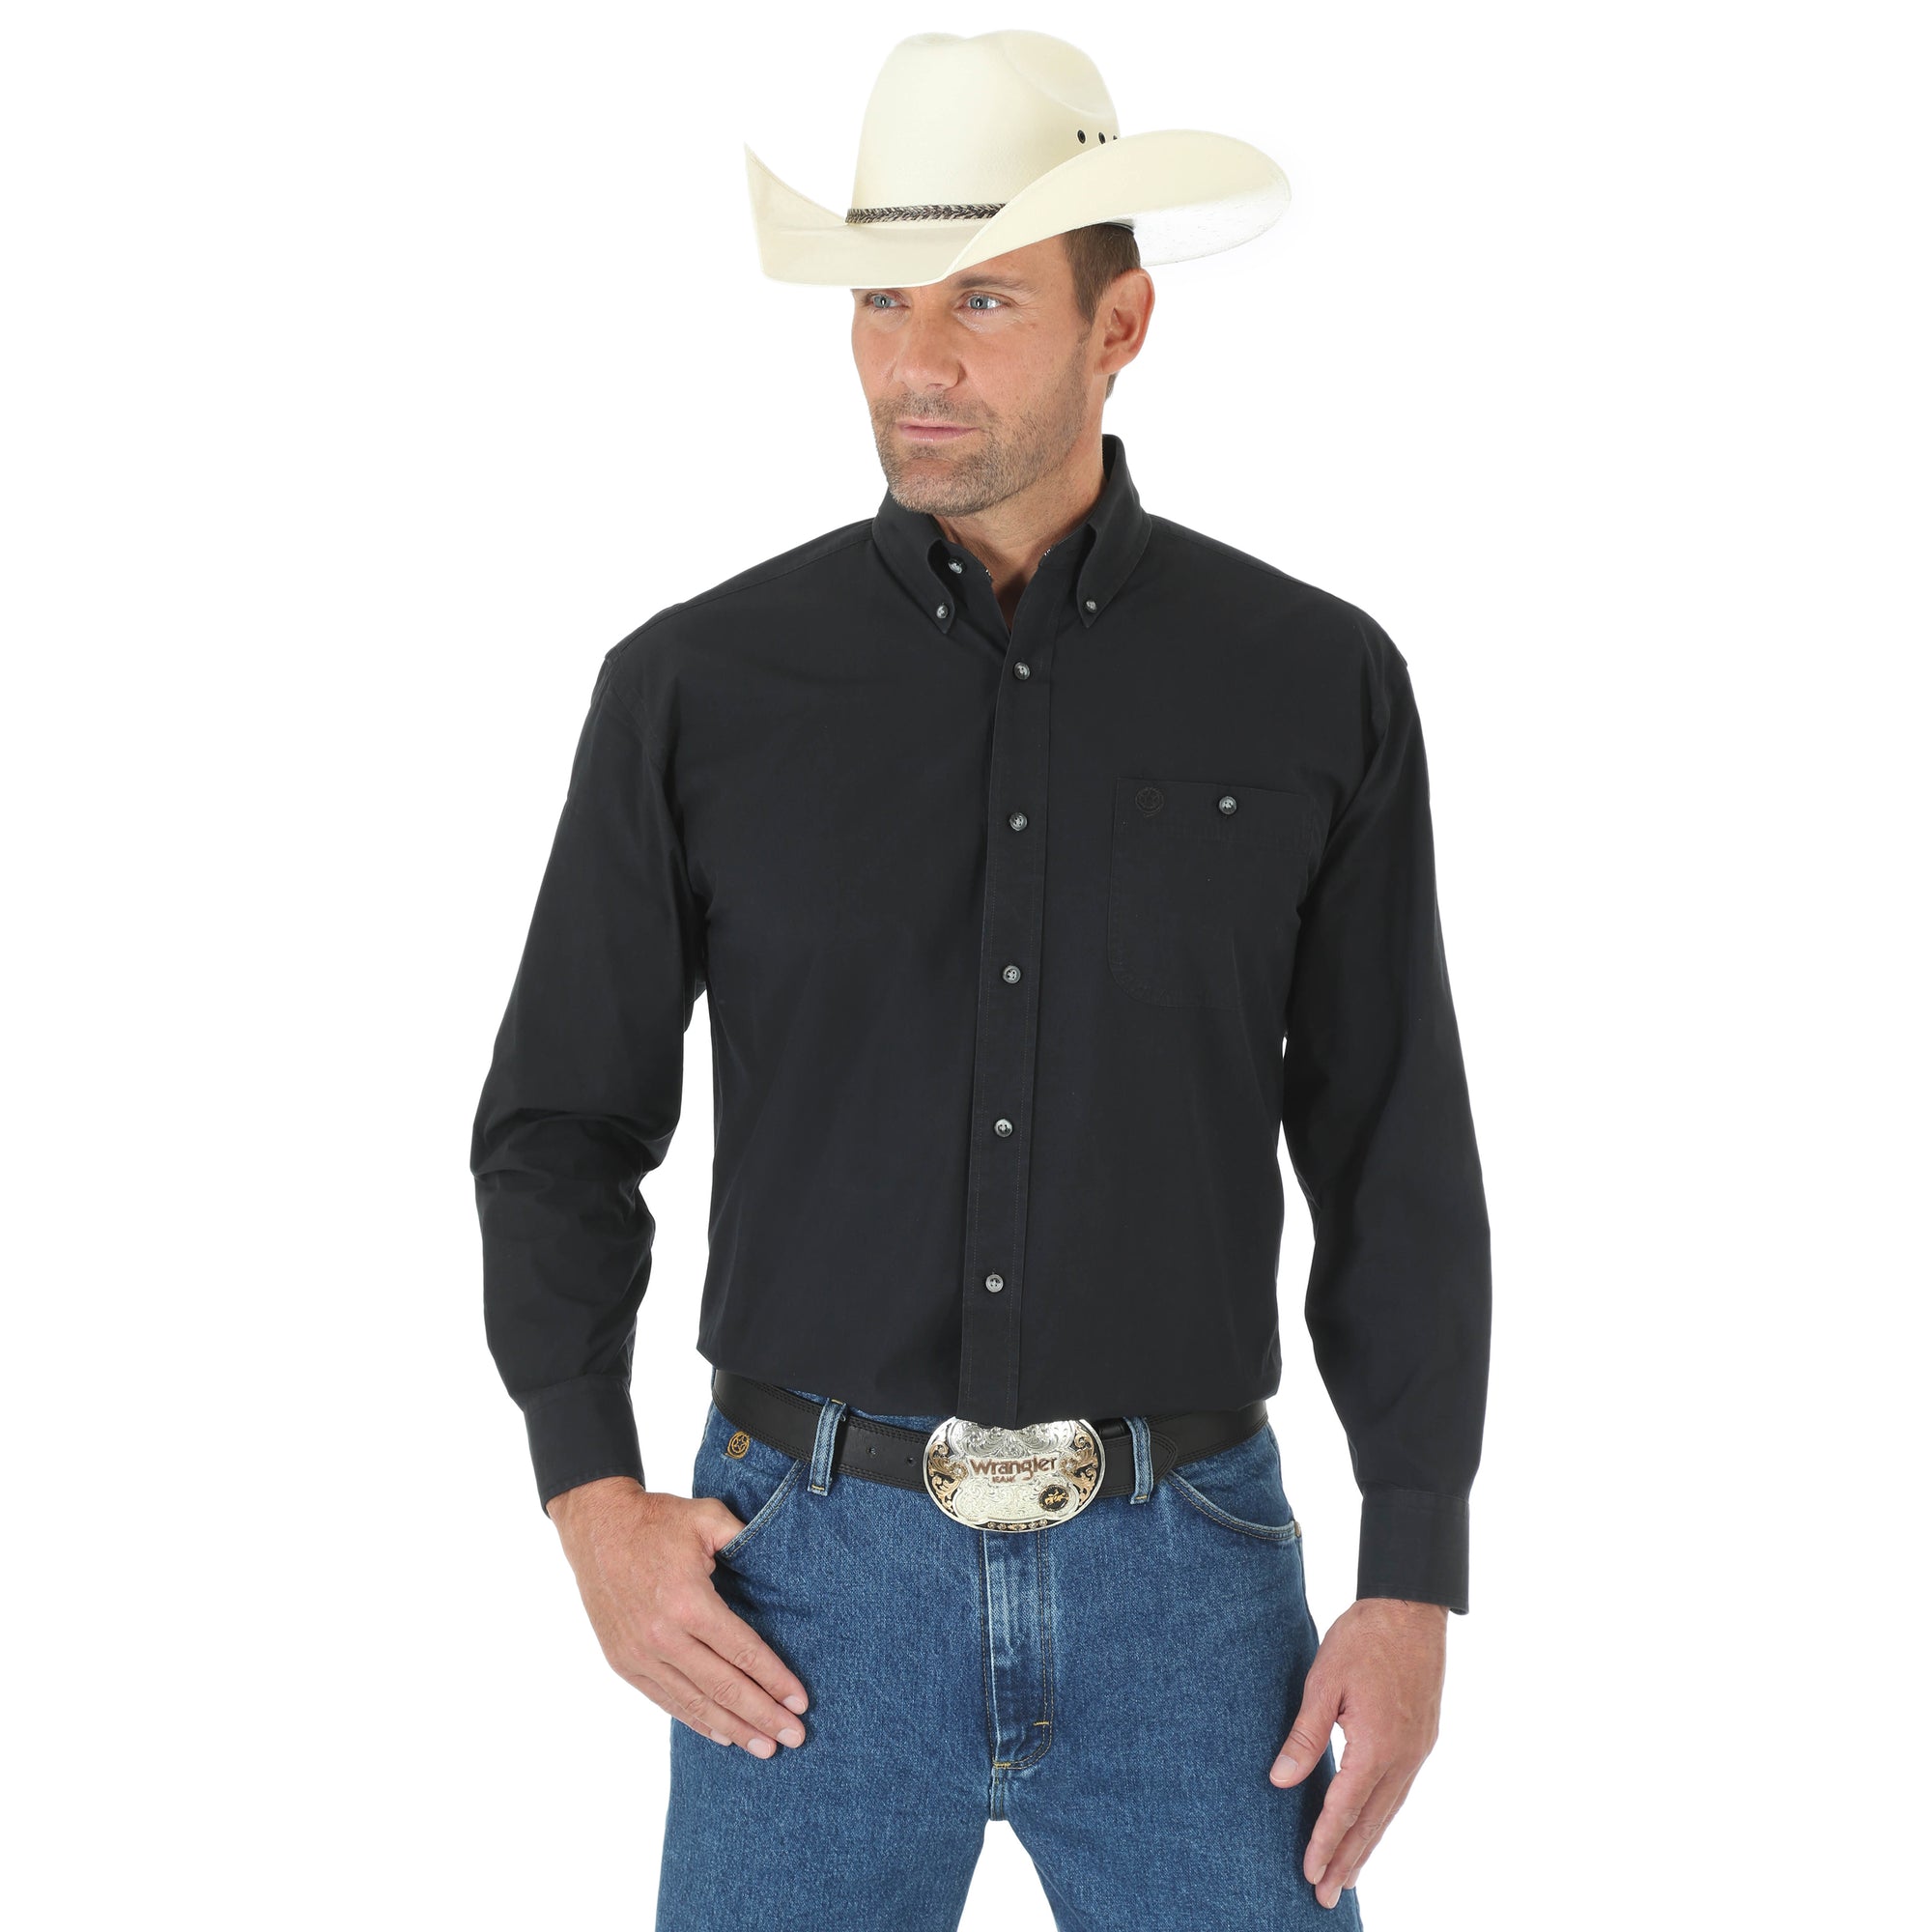 Gavel Western Wear is your source for all western clothing & access.